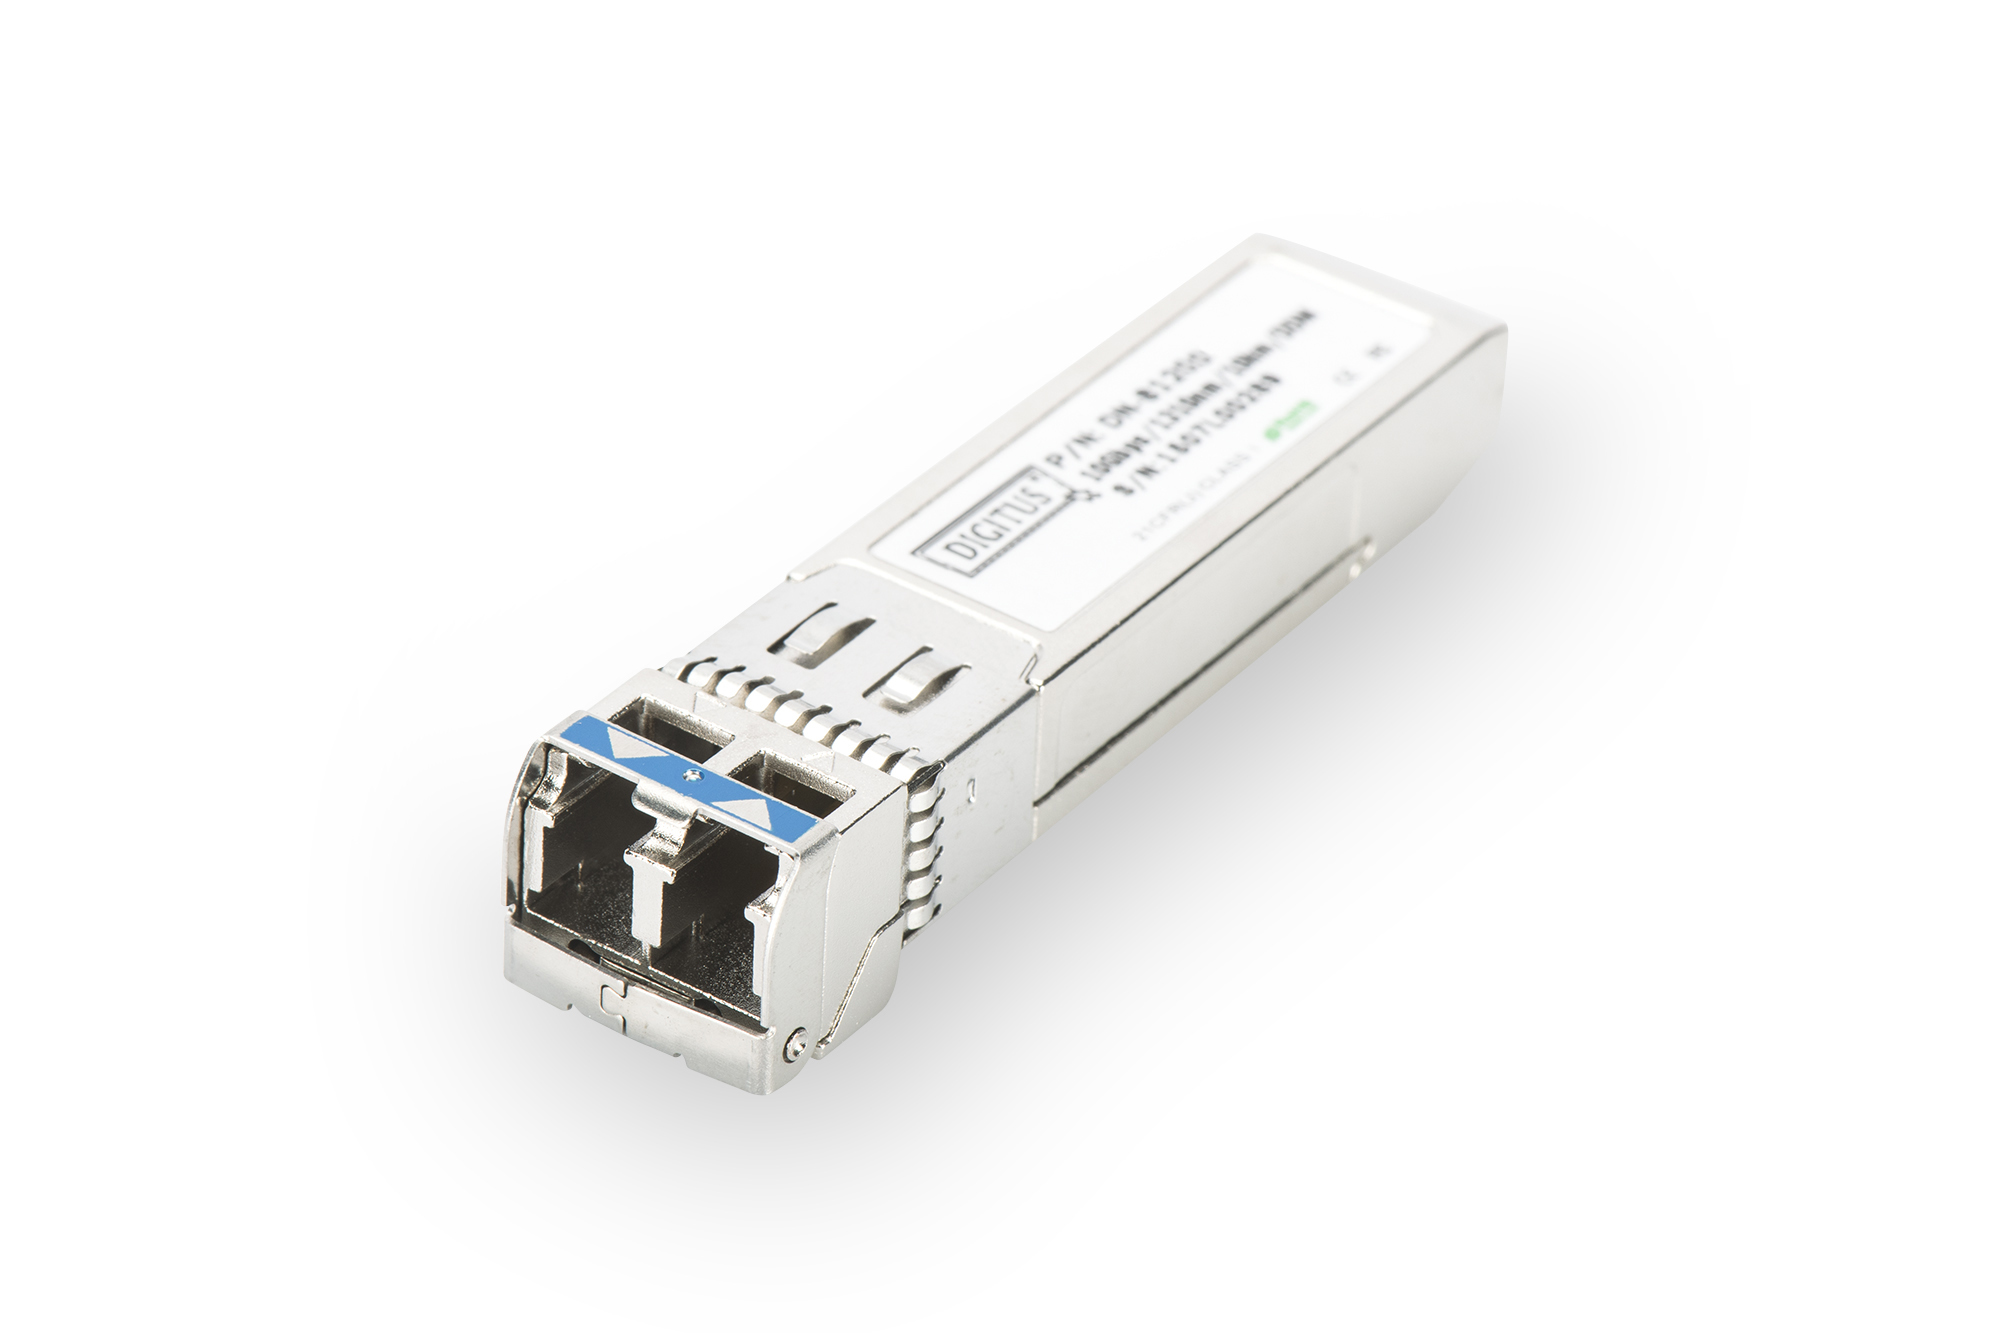 Digitus mini GBIC (SFP) Module, 10Gbps, 0.3km, with DDM Feature